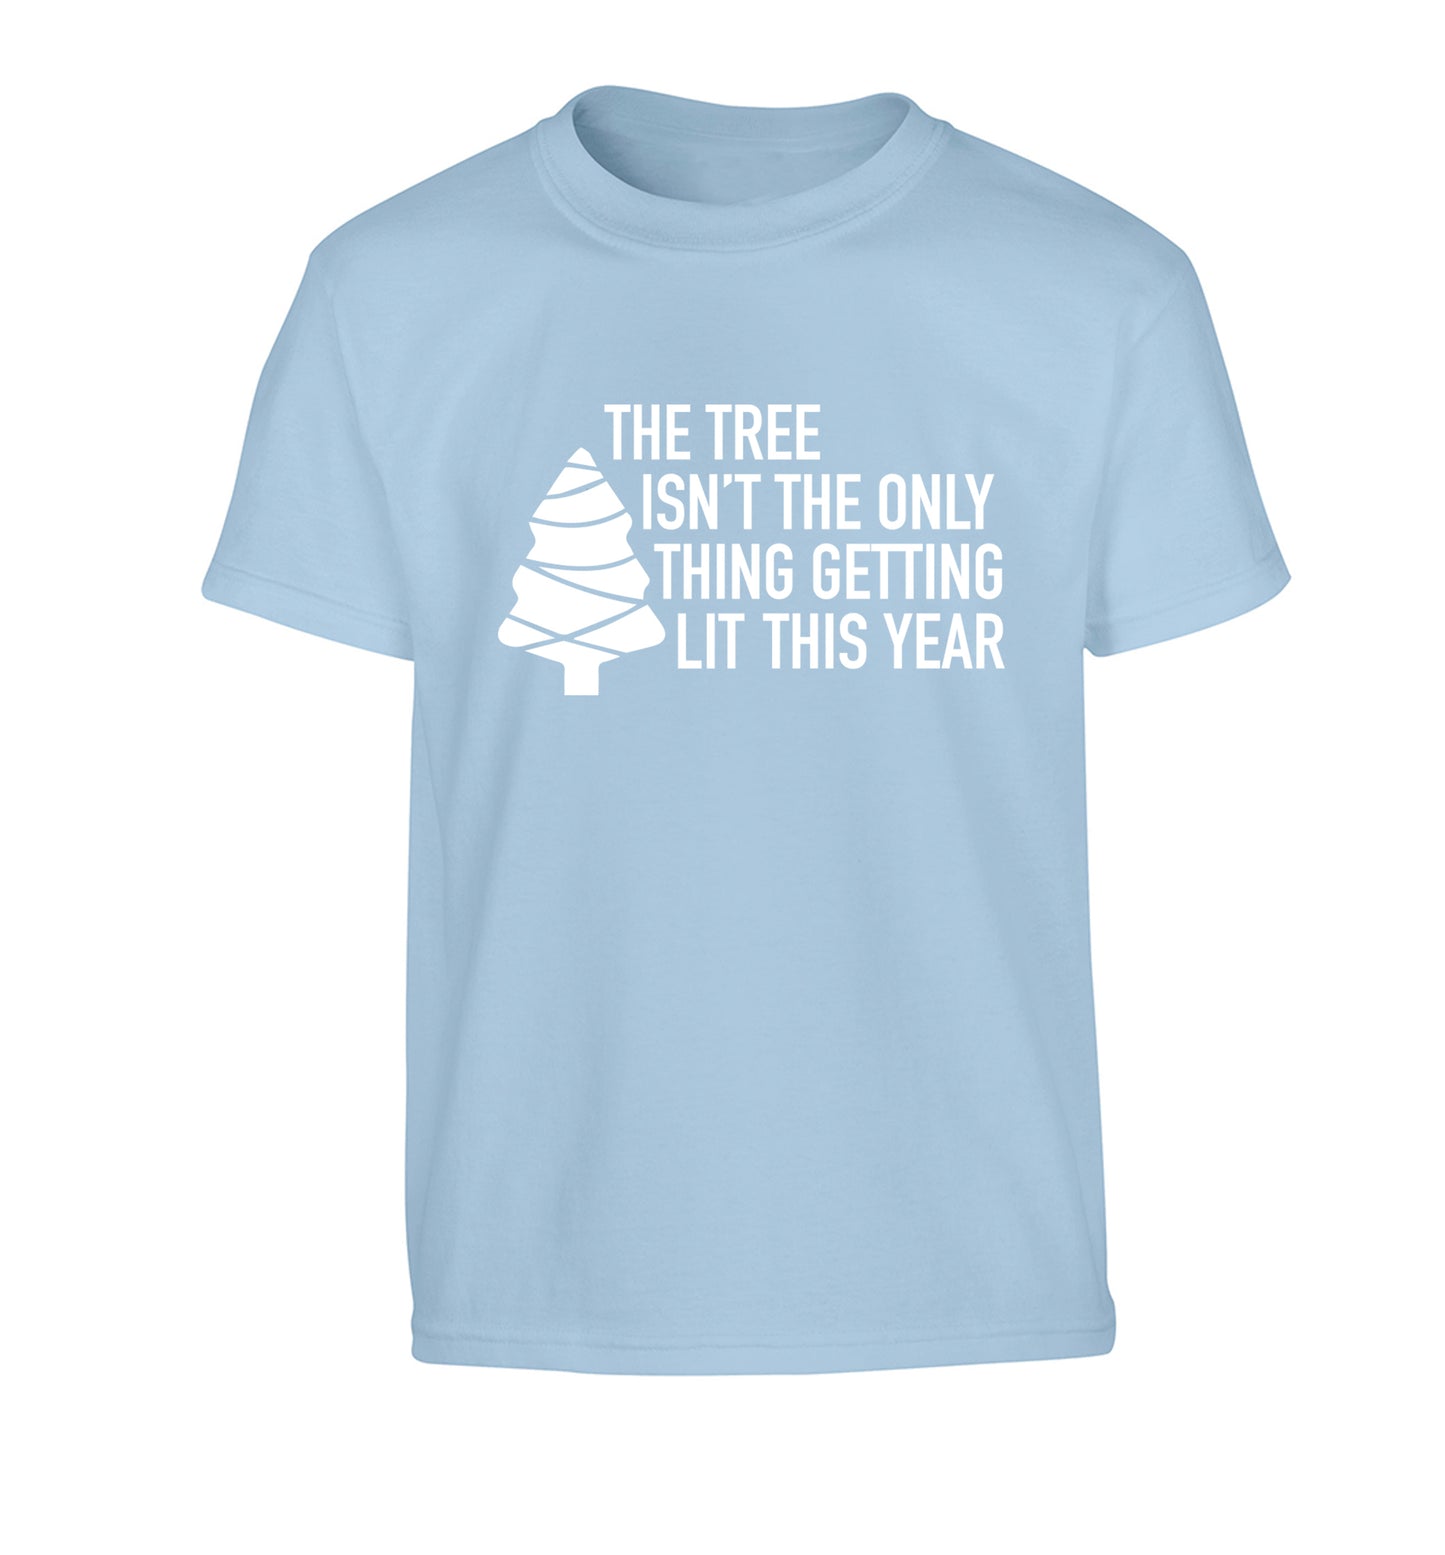 The tree isn't the only thing getting lit this year Children's light blue Tshirt 12-14 Years